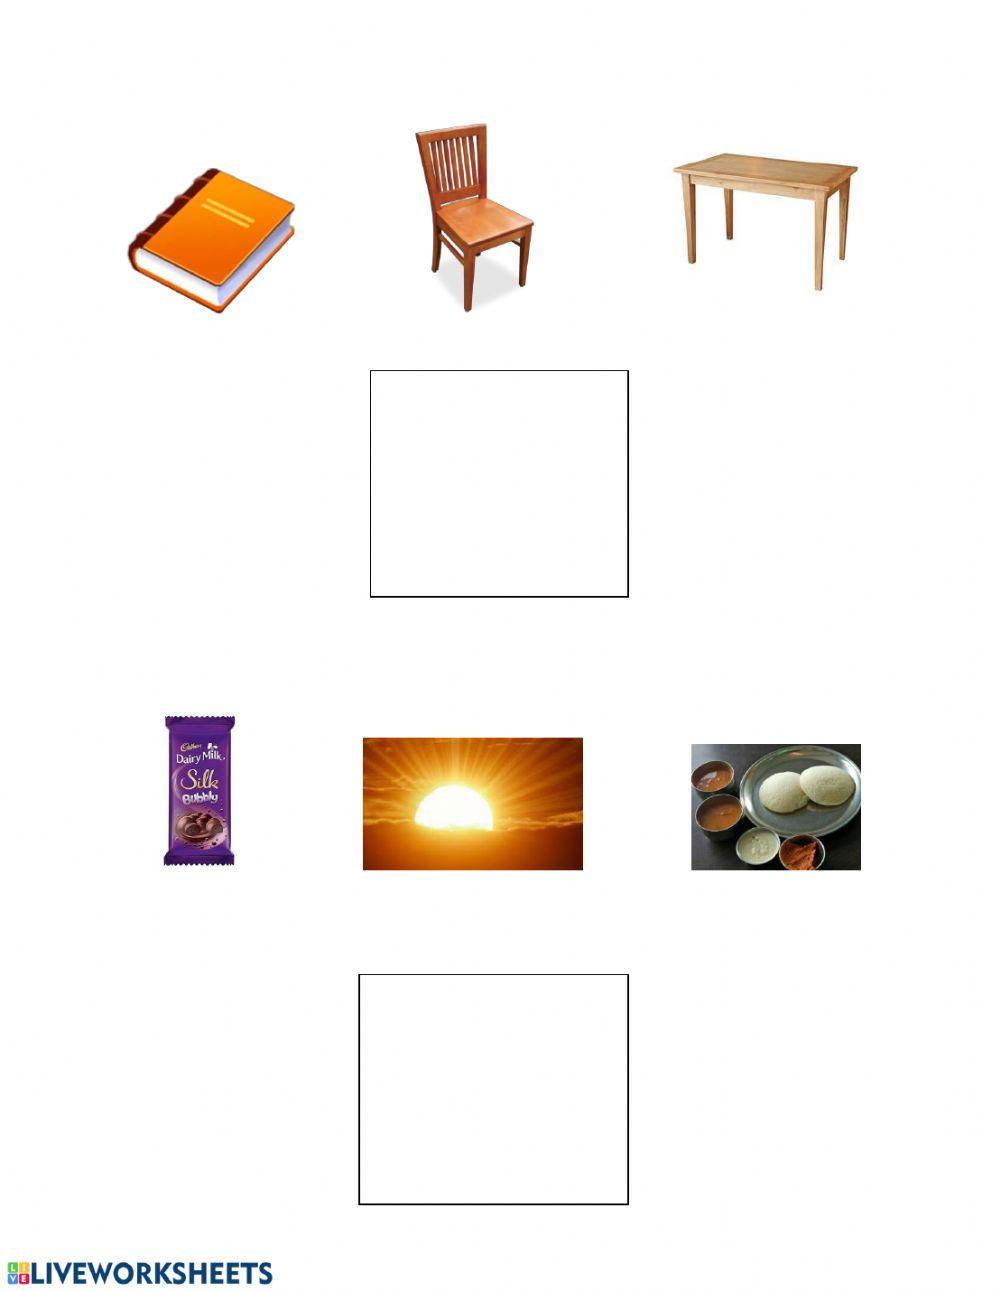 Find the different object - 5